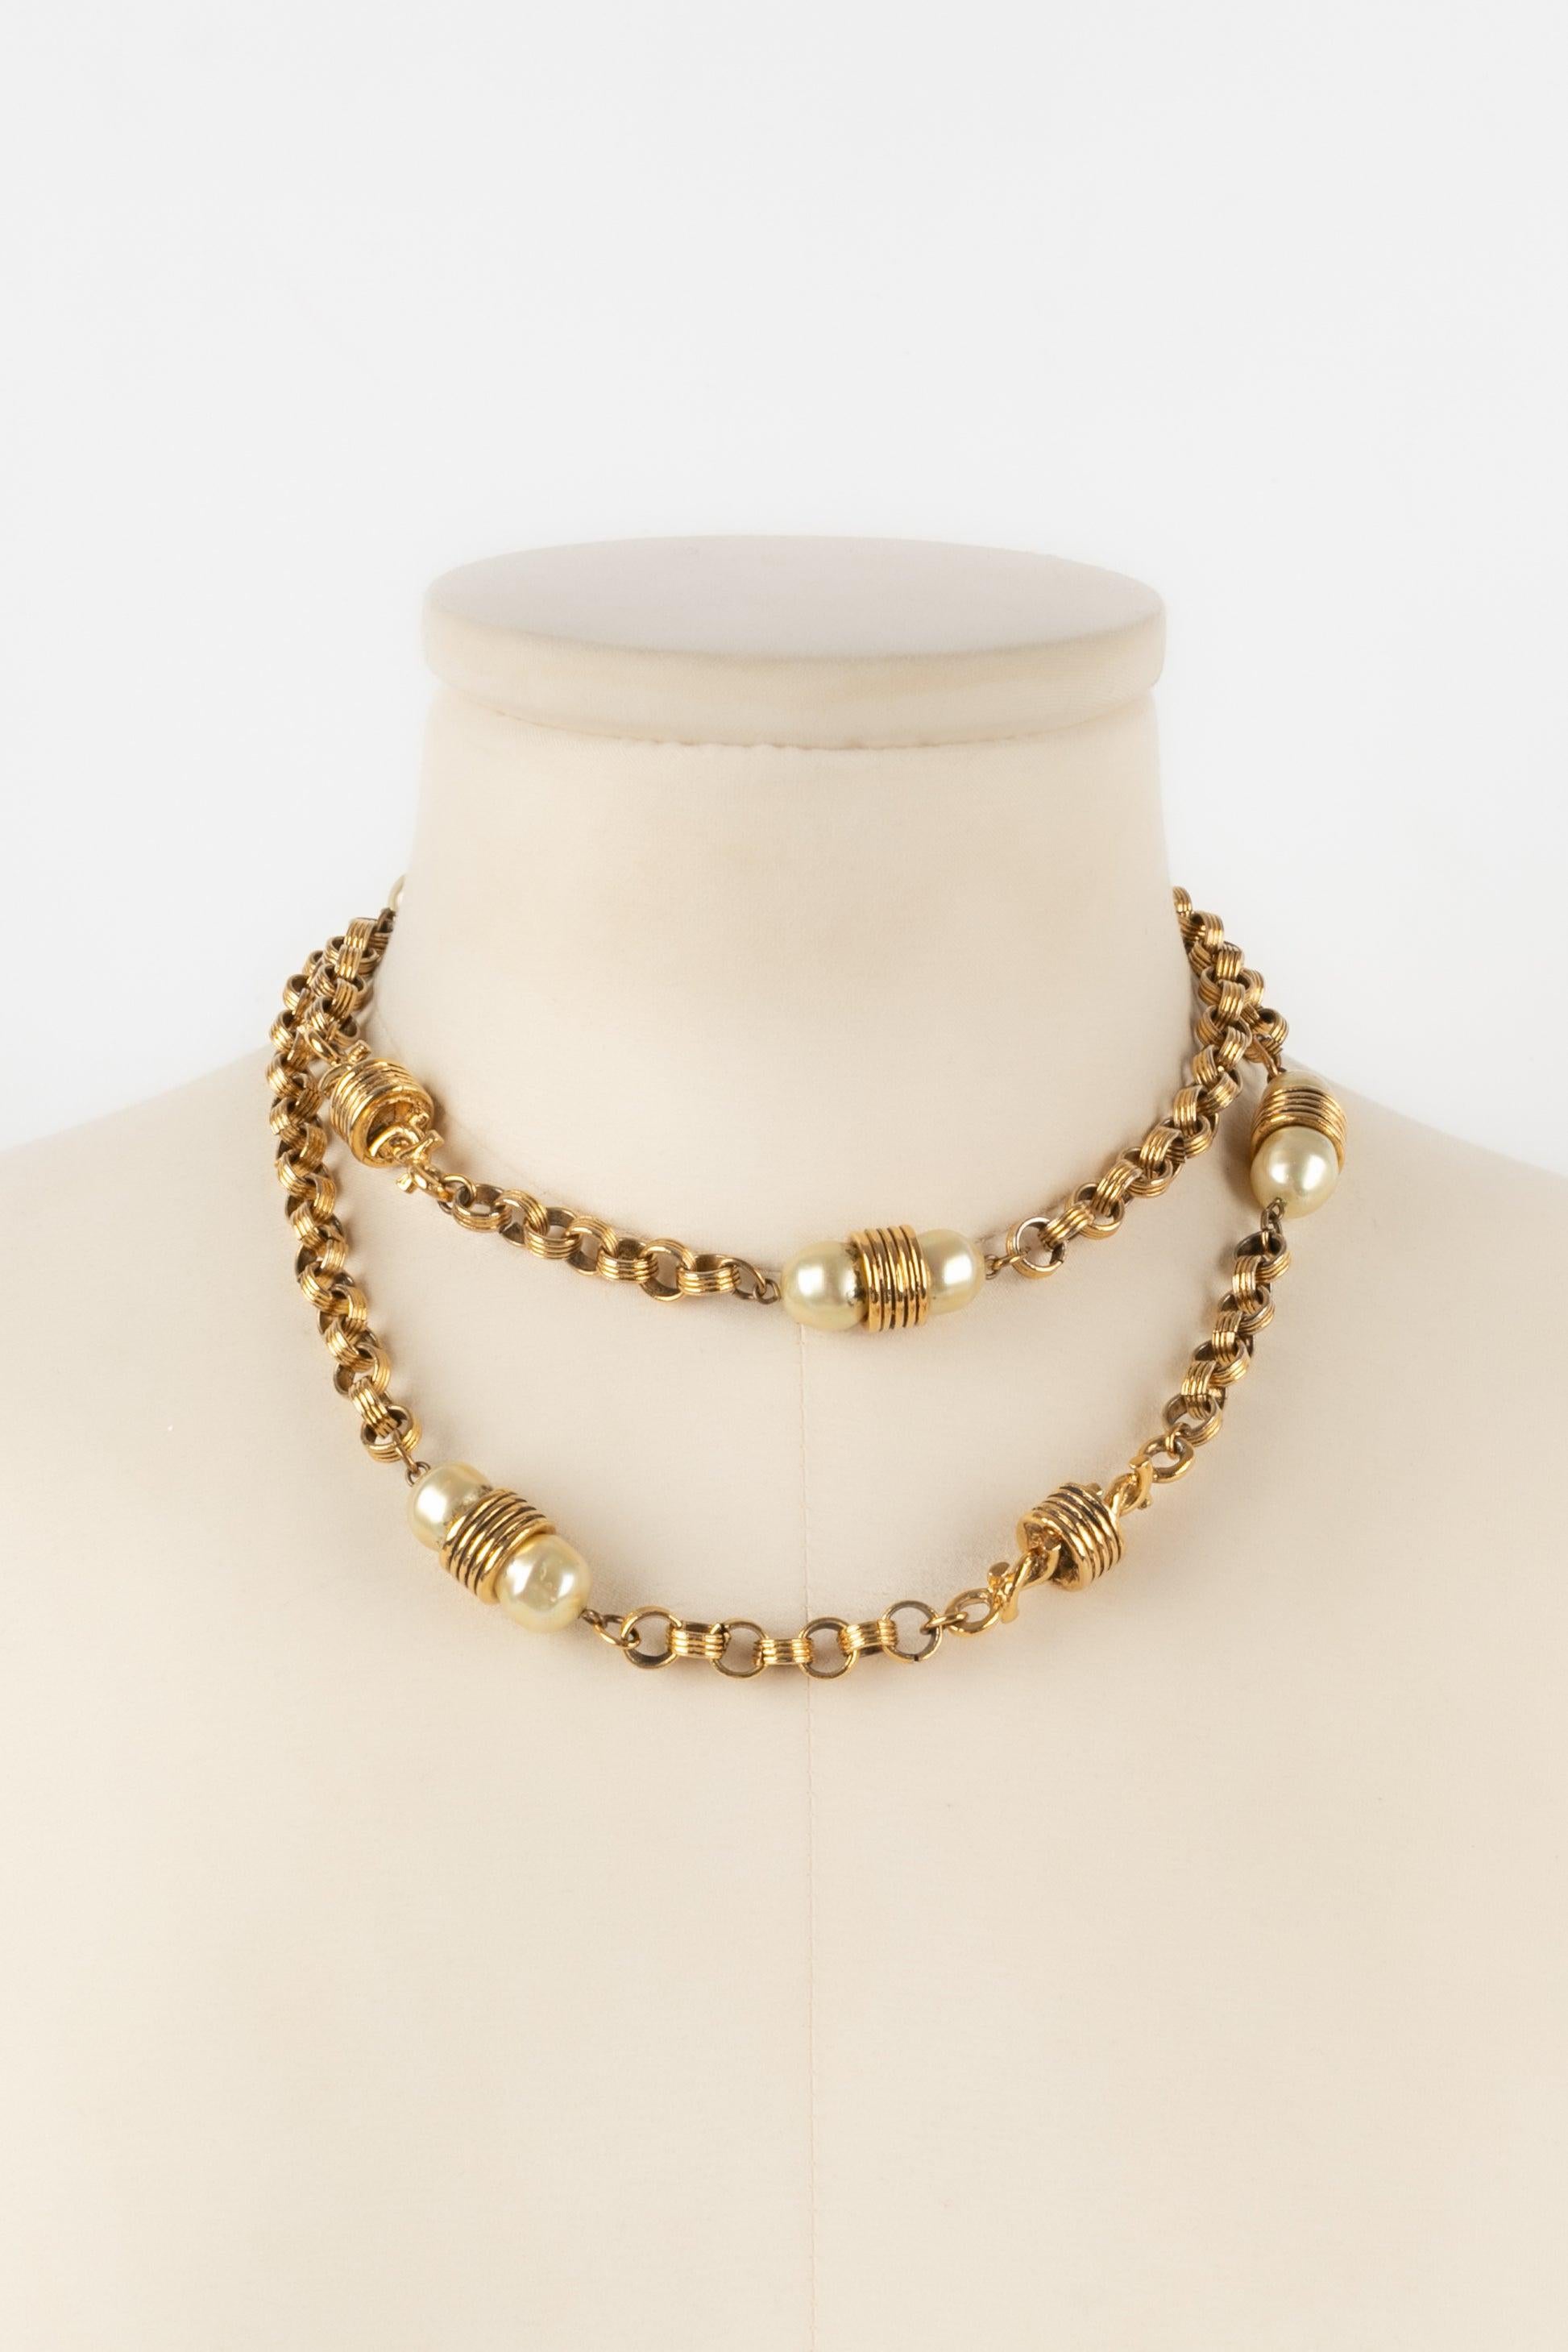 Chanel Golden Metal Necklace with Costume Pearls, 1980s For Sale 5